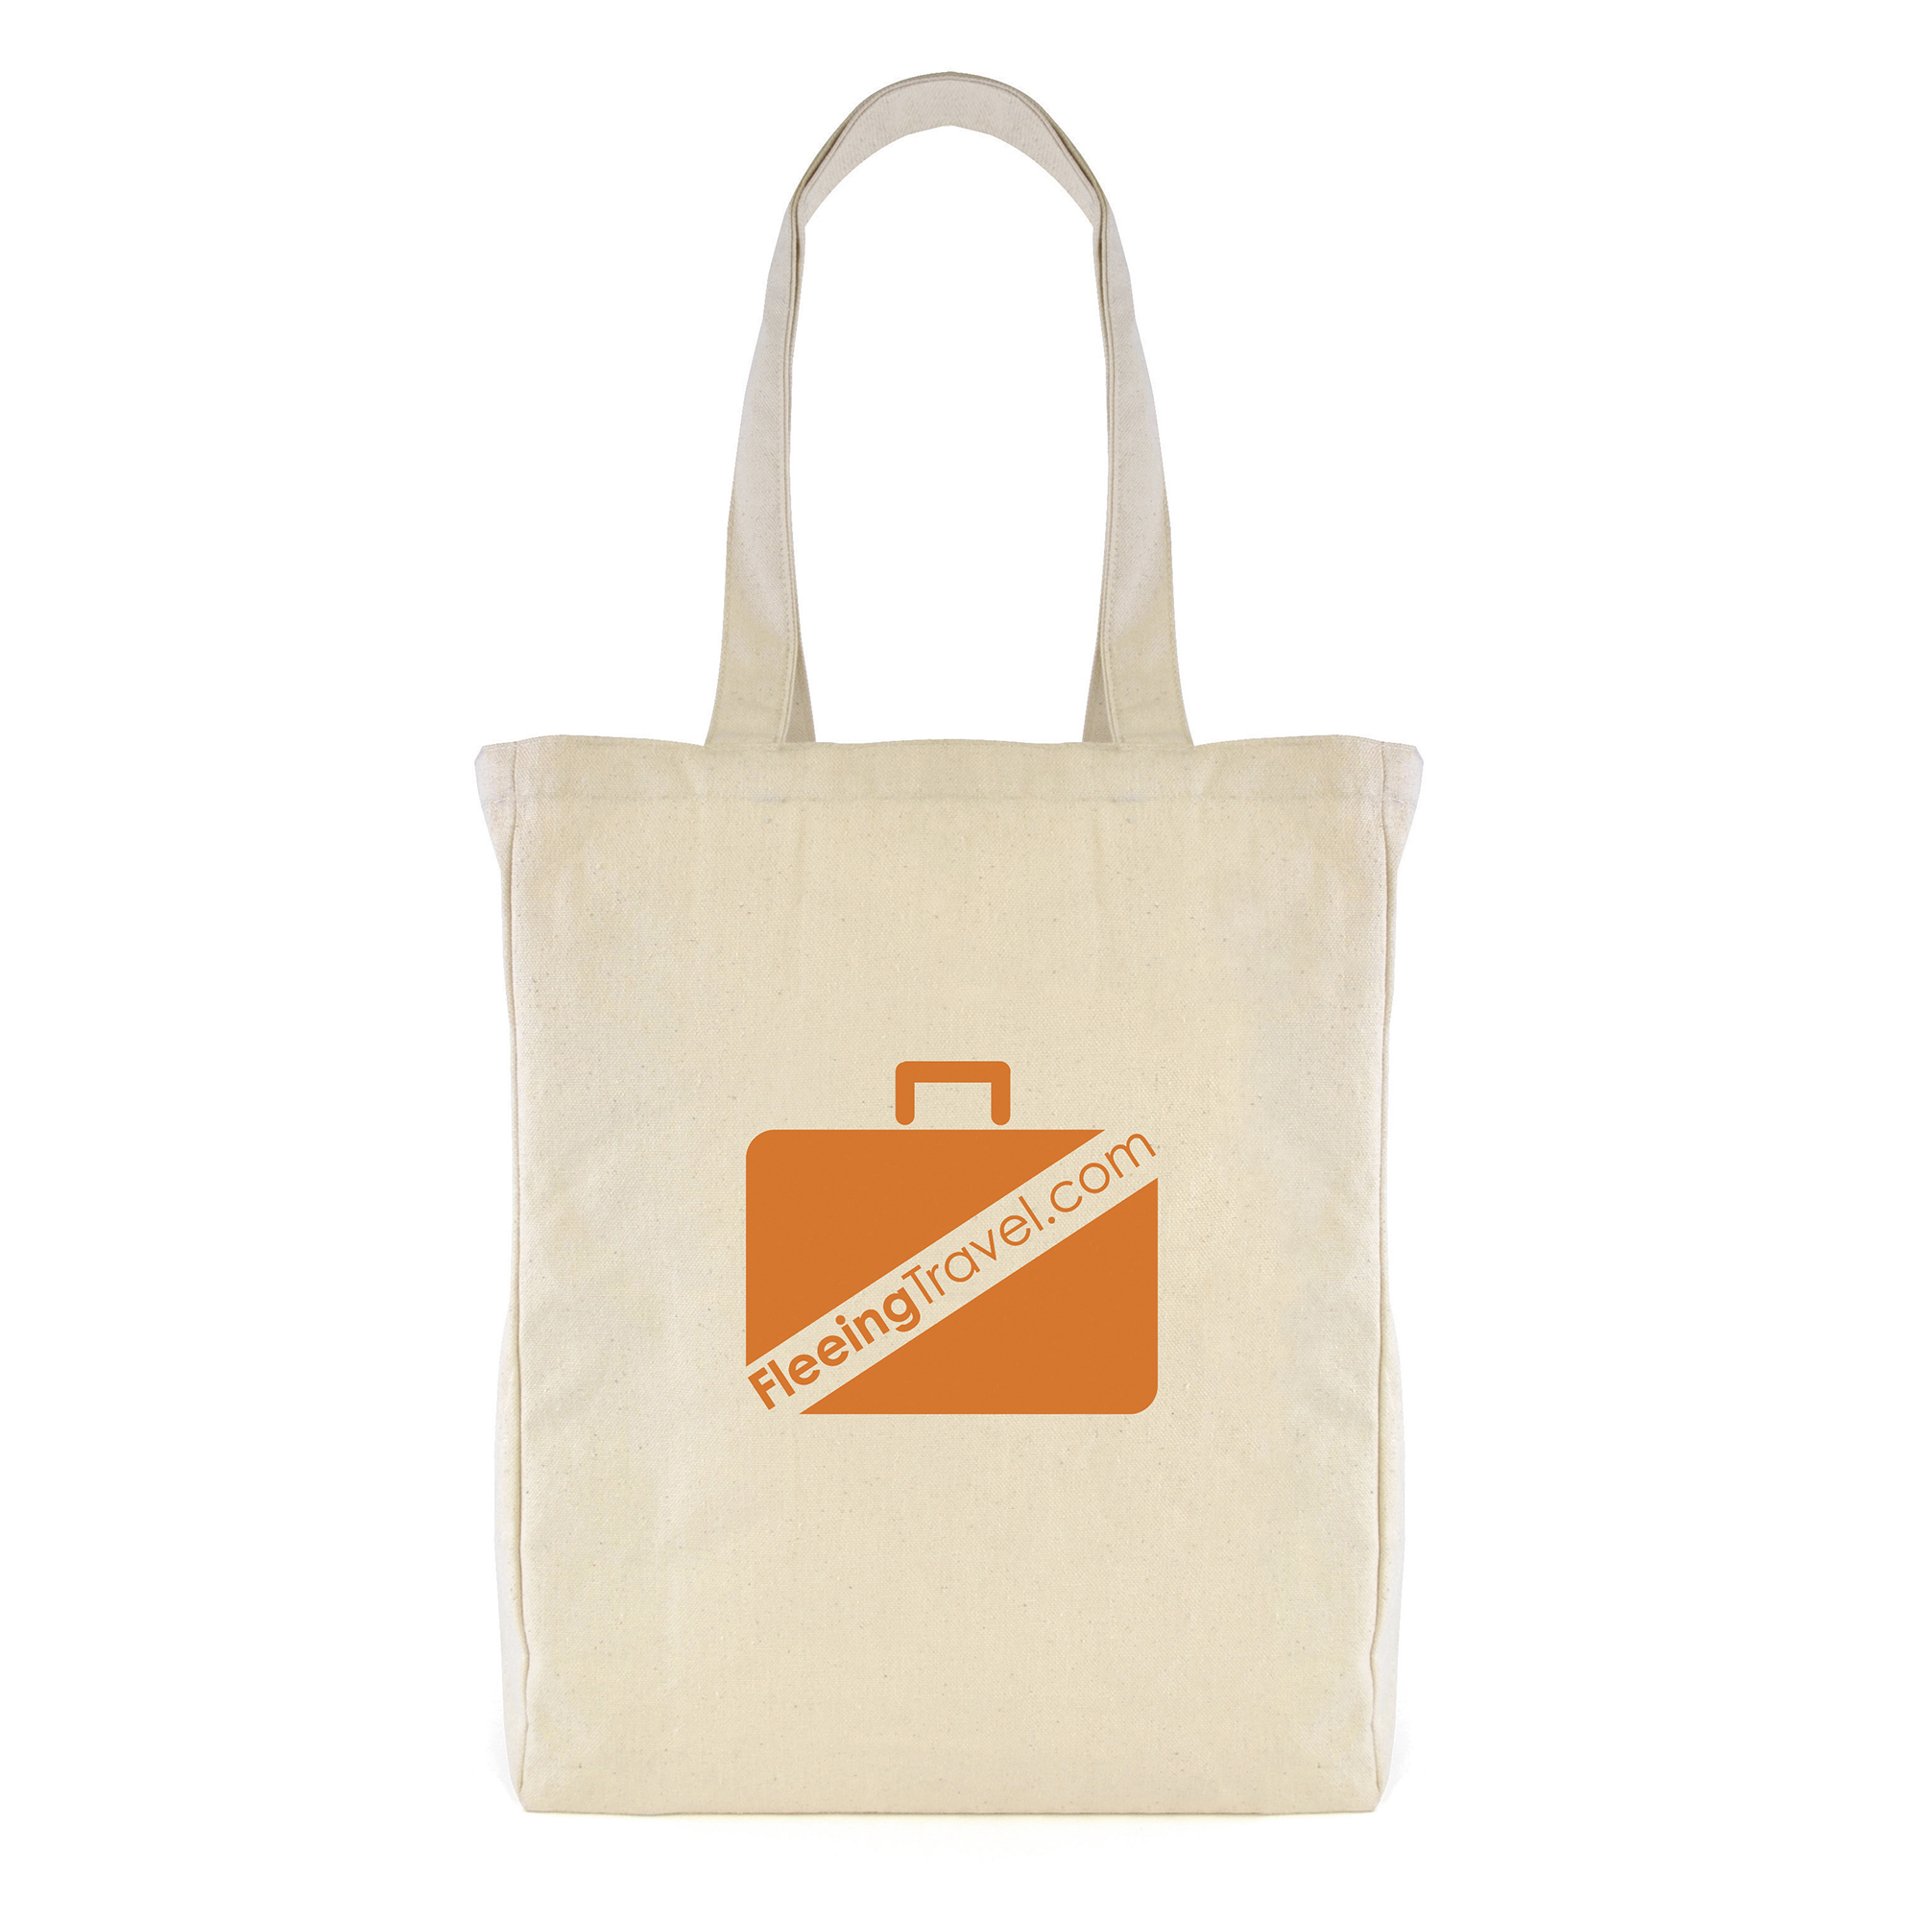 Natural canvas tote bag with branding to one side